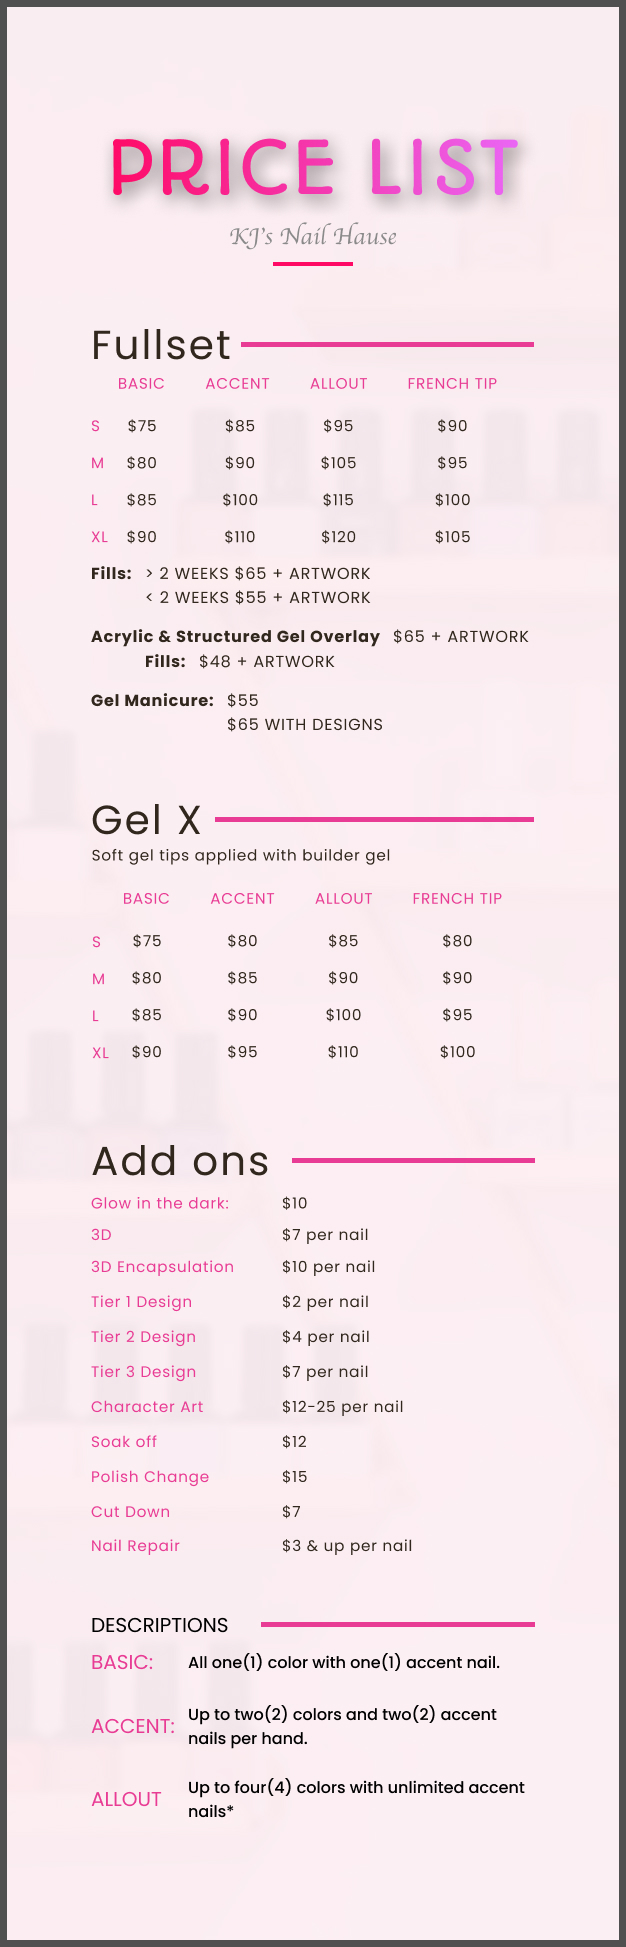 Price list of all services.